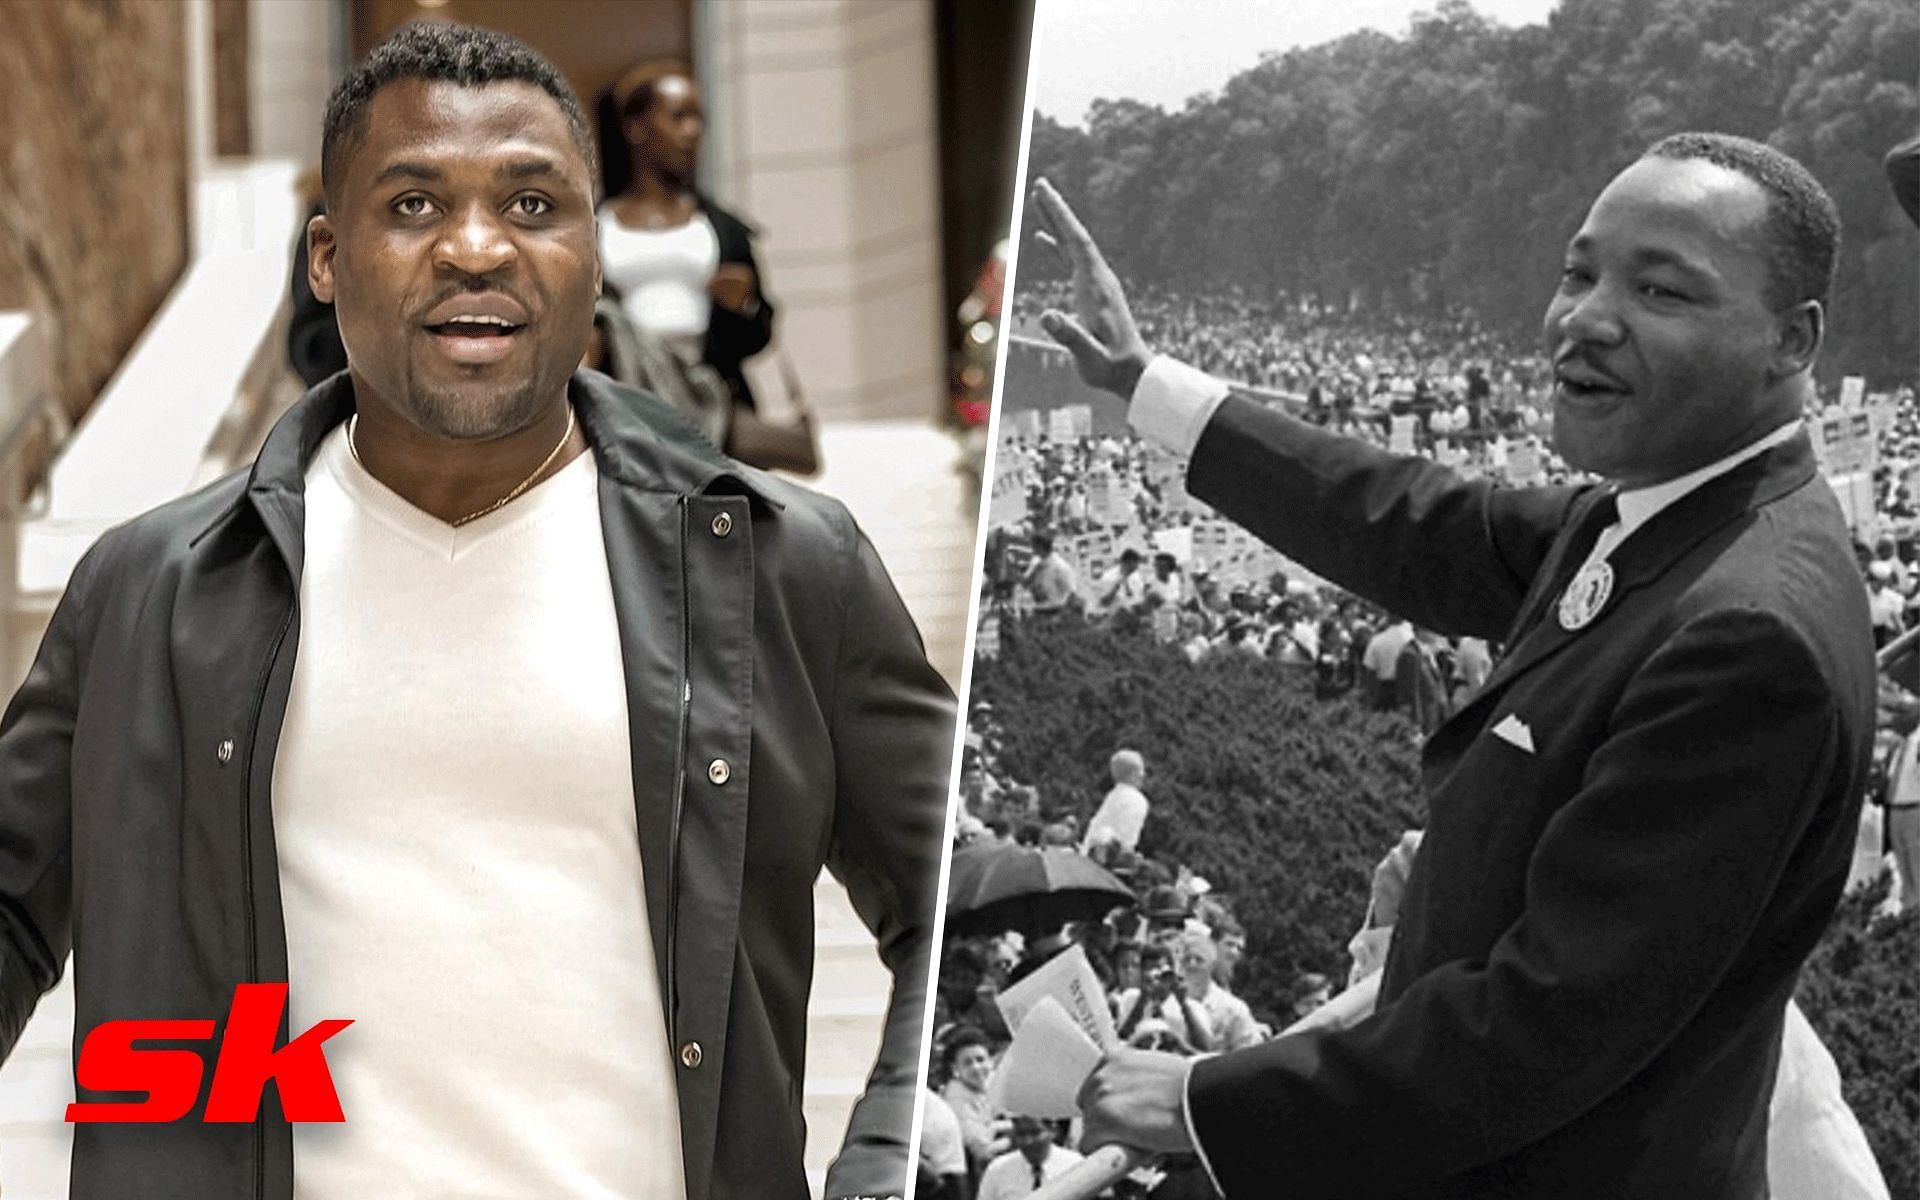 Francis Ngannou makes terrific Martin Luther King reference in first statement post UFC exit [Images via: @POTUS on Twitter and @francisngannou on Instagram]